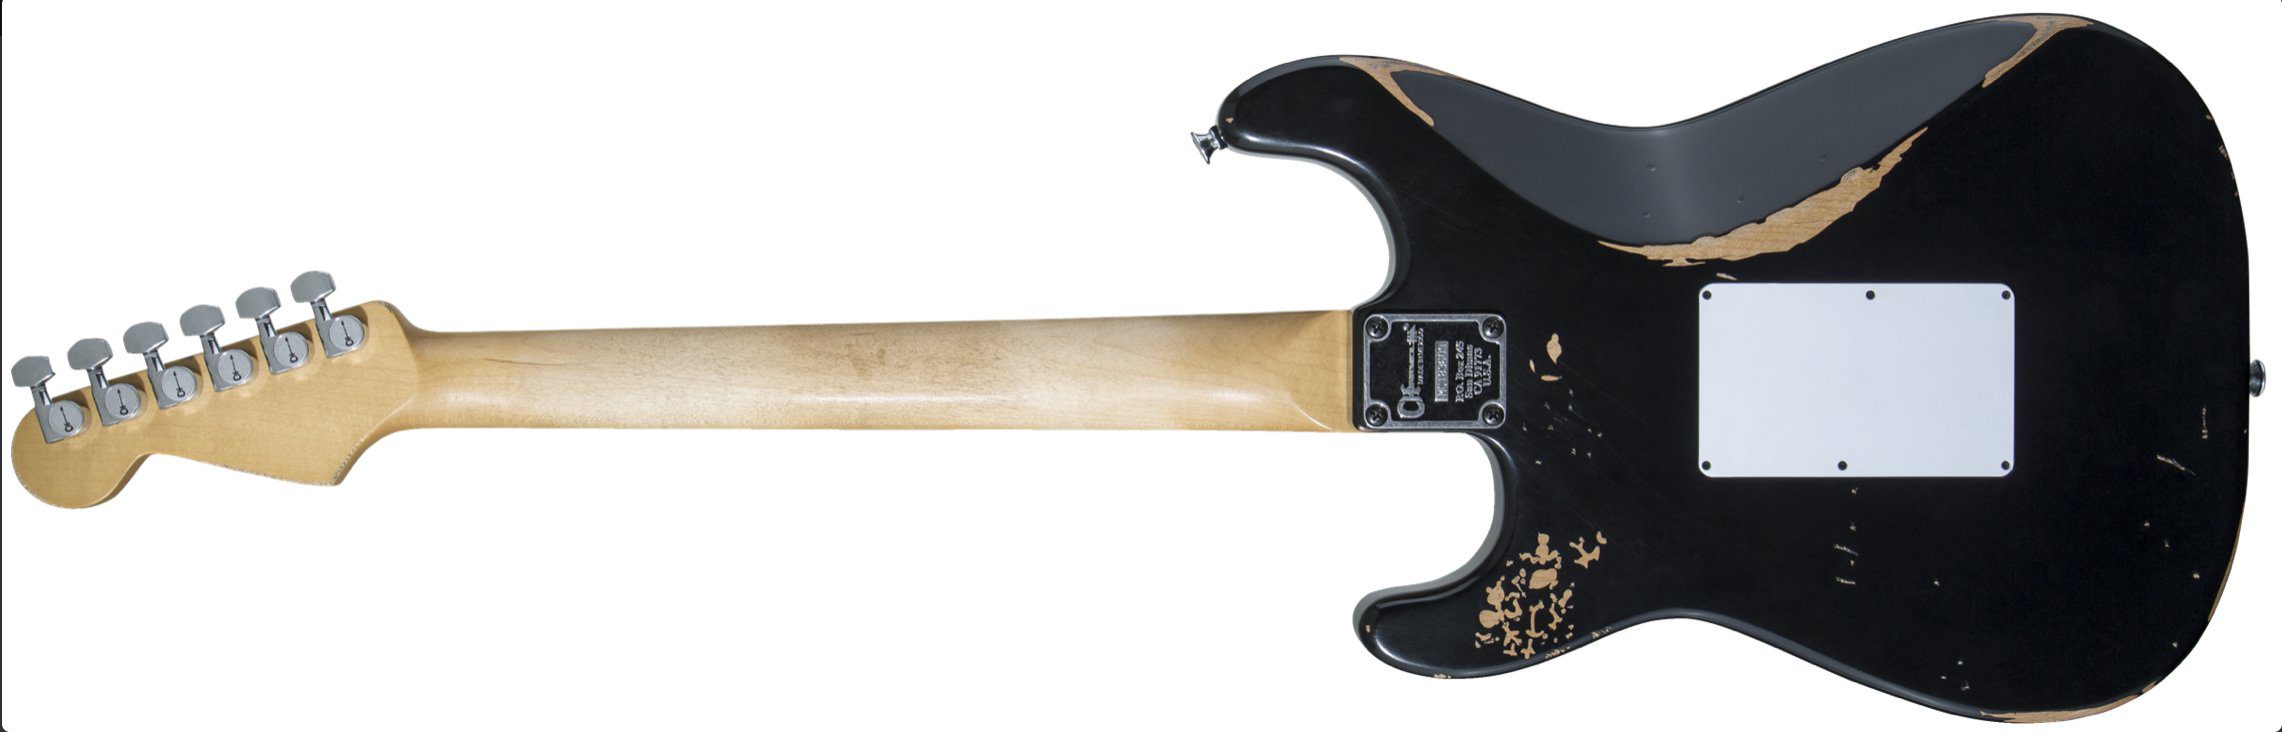 Charvel-Limited-Edition-Super-Stock-SC1-rear